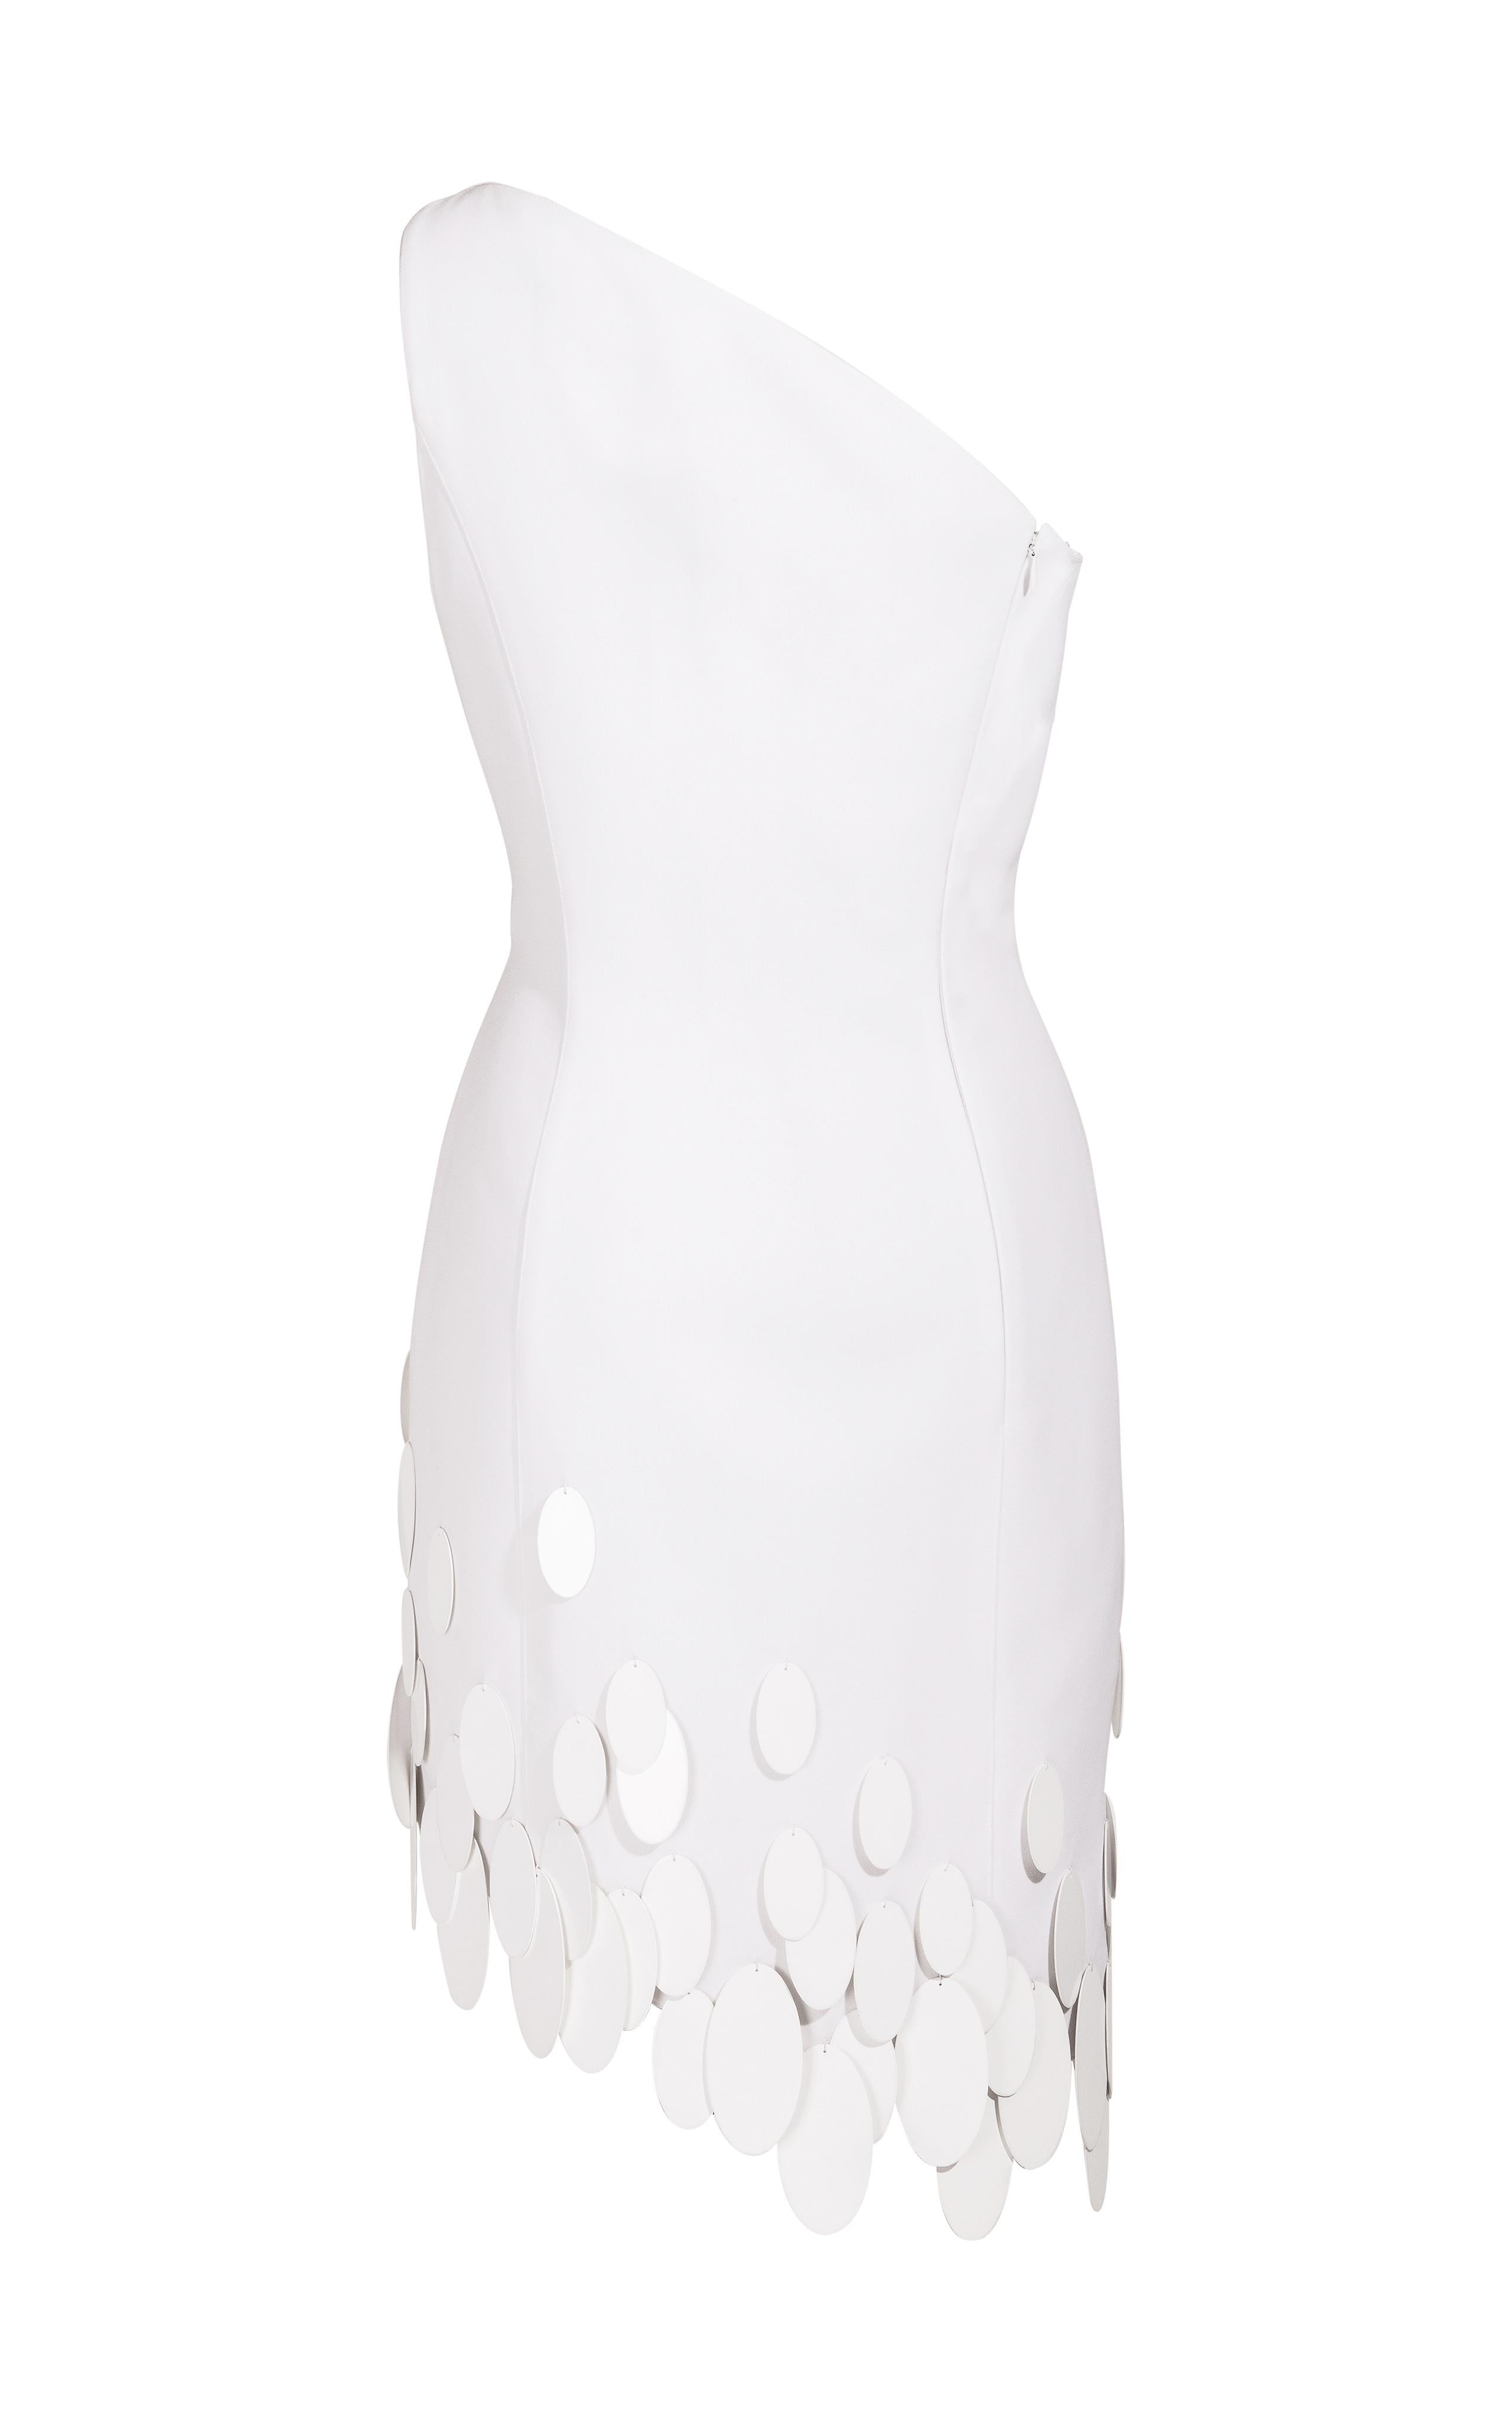 Women's S/S 1999 Thierry Mugler Asymmetrical White Dress with Oval Paillette 'Fringe'